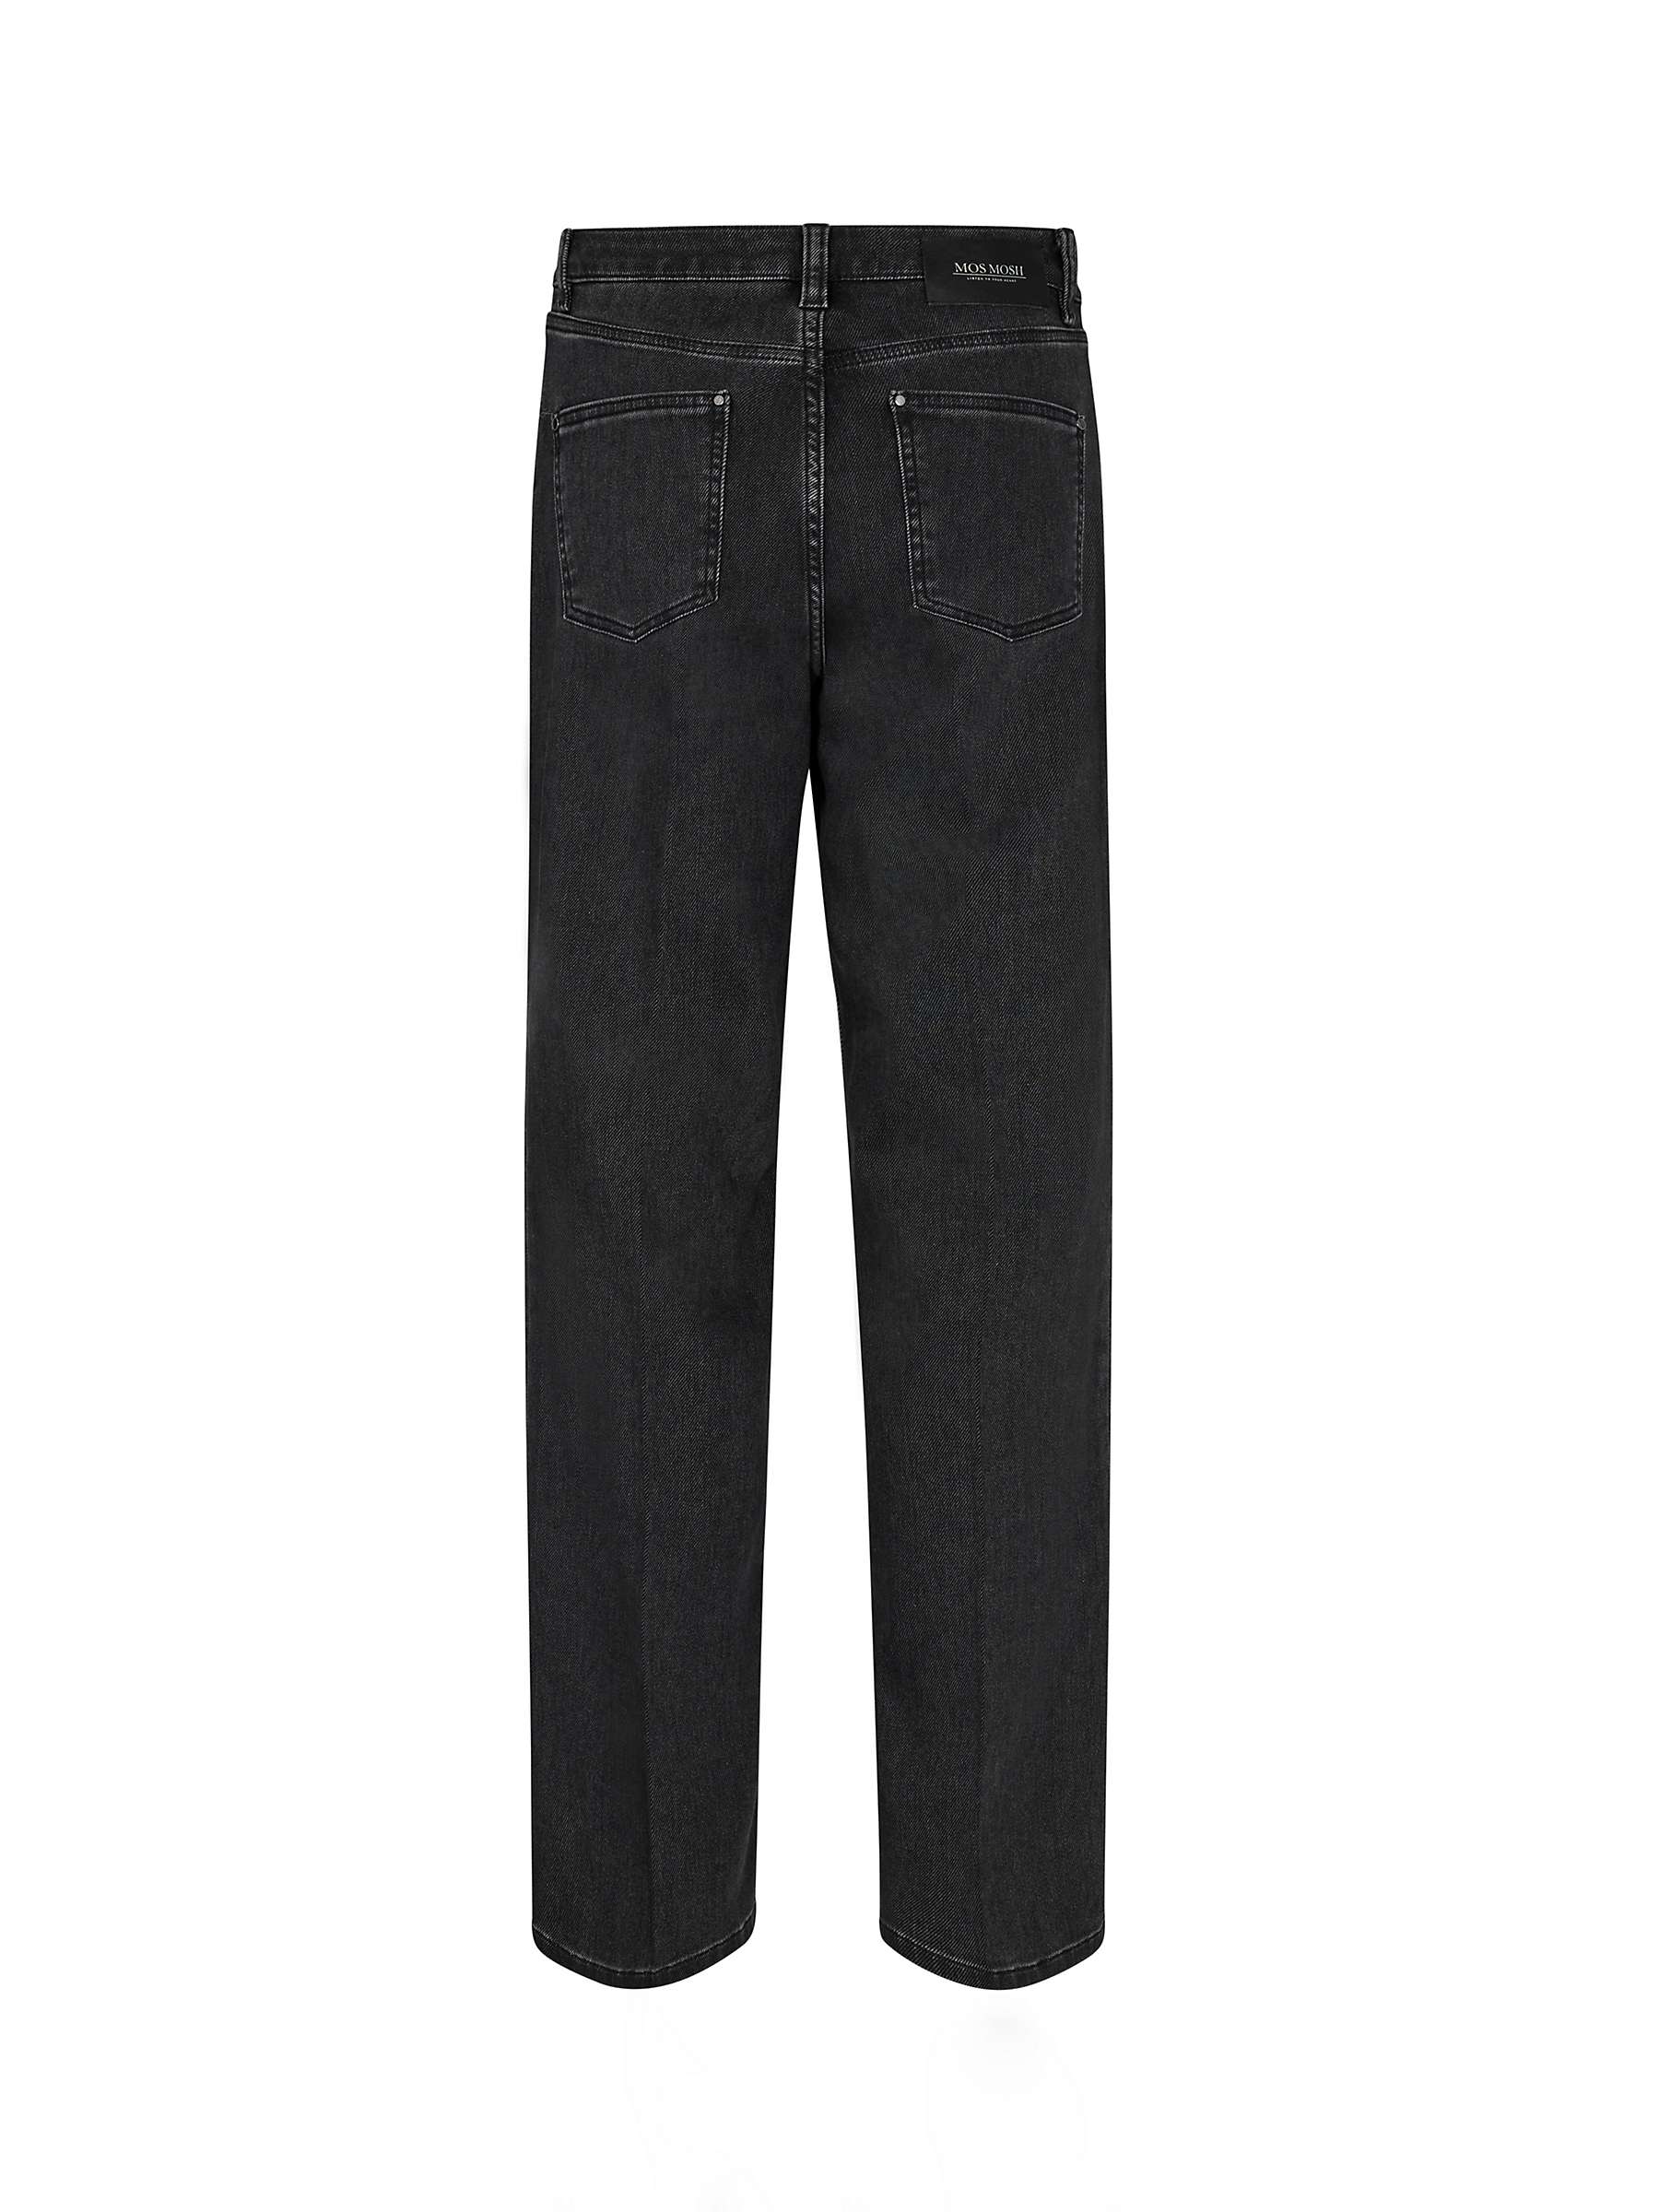 Buy MOS MOSH Relee Young Straight Fit Jeans, Dark Grey Online at johnlewis.com